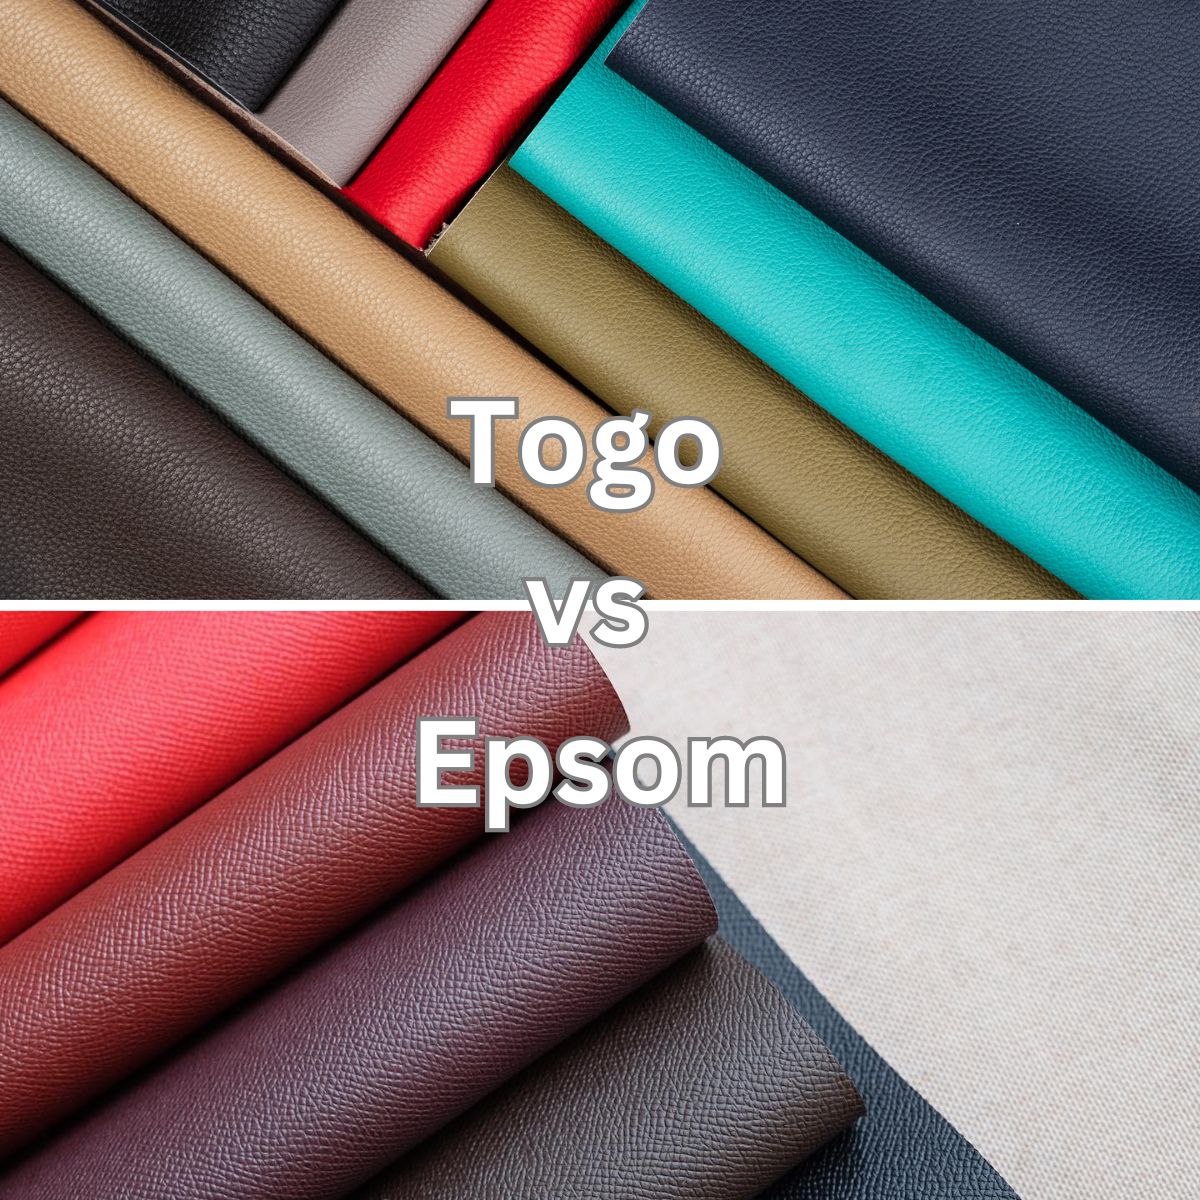 The difference between Togo and Epsom leather